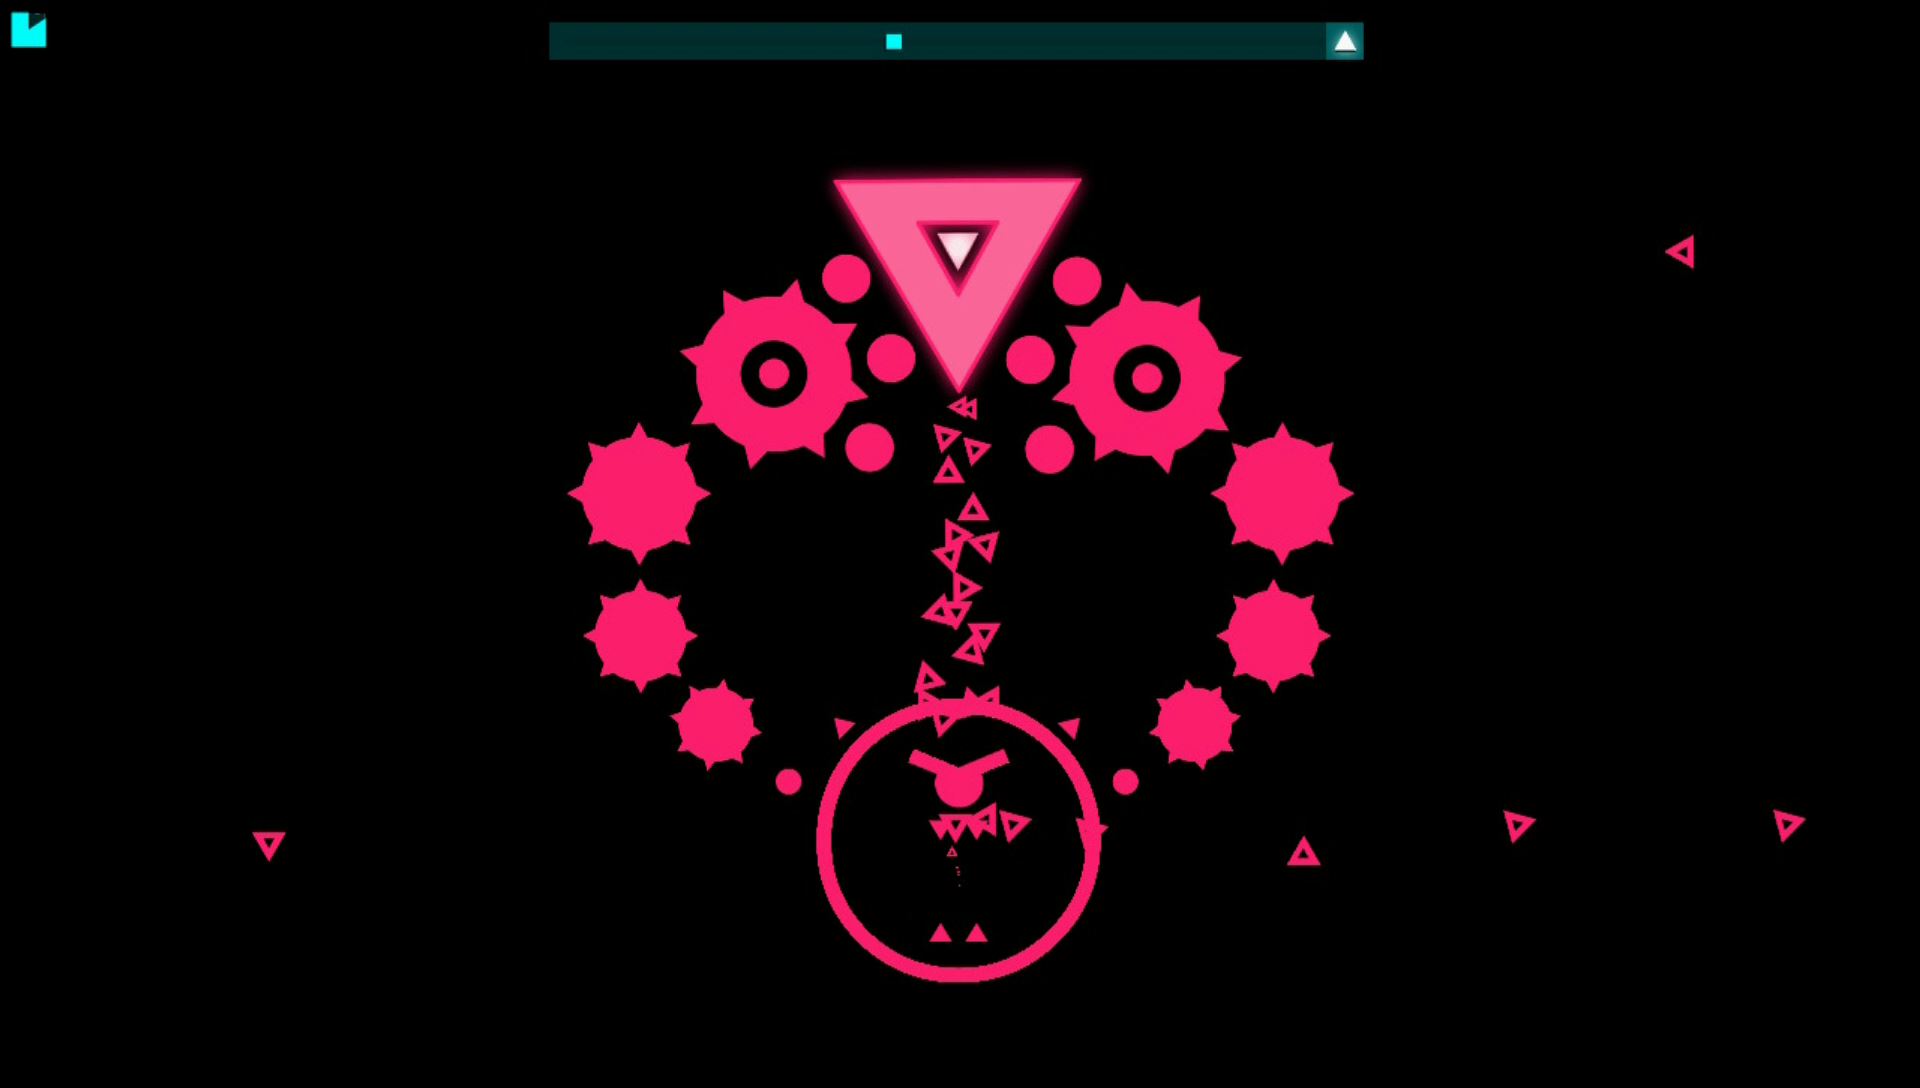 Just Shapes & Beats Review – Irrational Passions